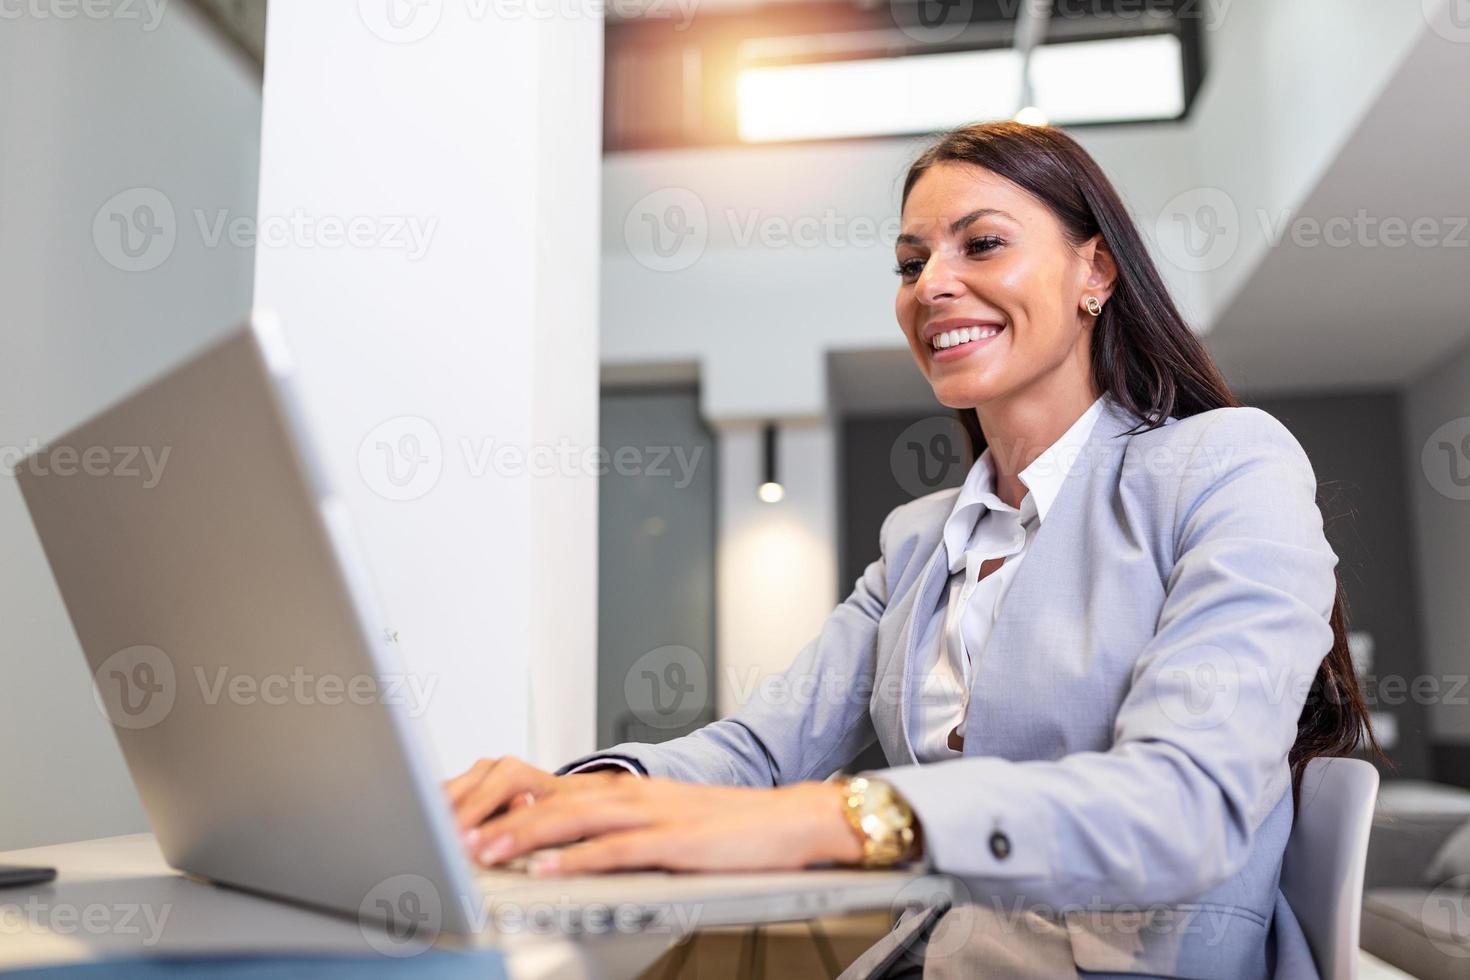 Young woman working from home, while in quarantine isolation during the Covid-19 health crisis. Portrait of a beautiful young business woman smiling and looking at laptop screen photo